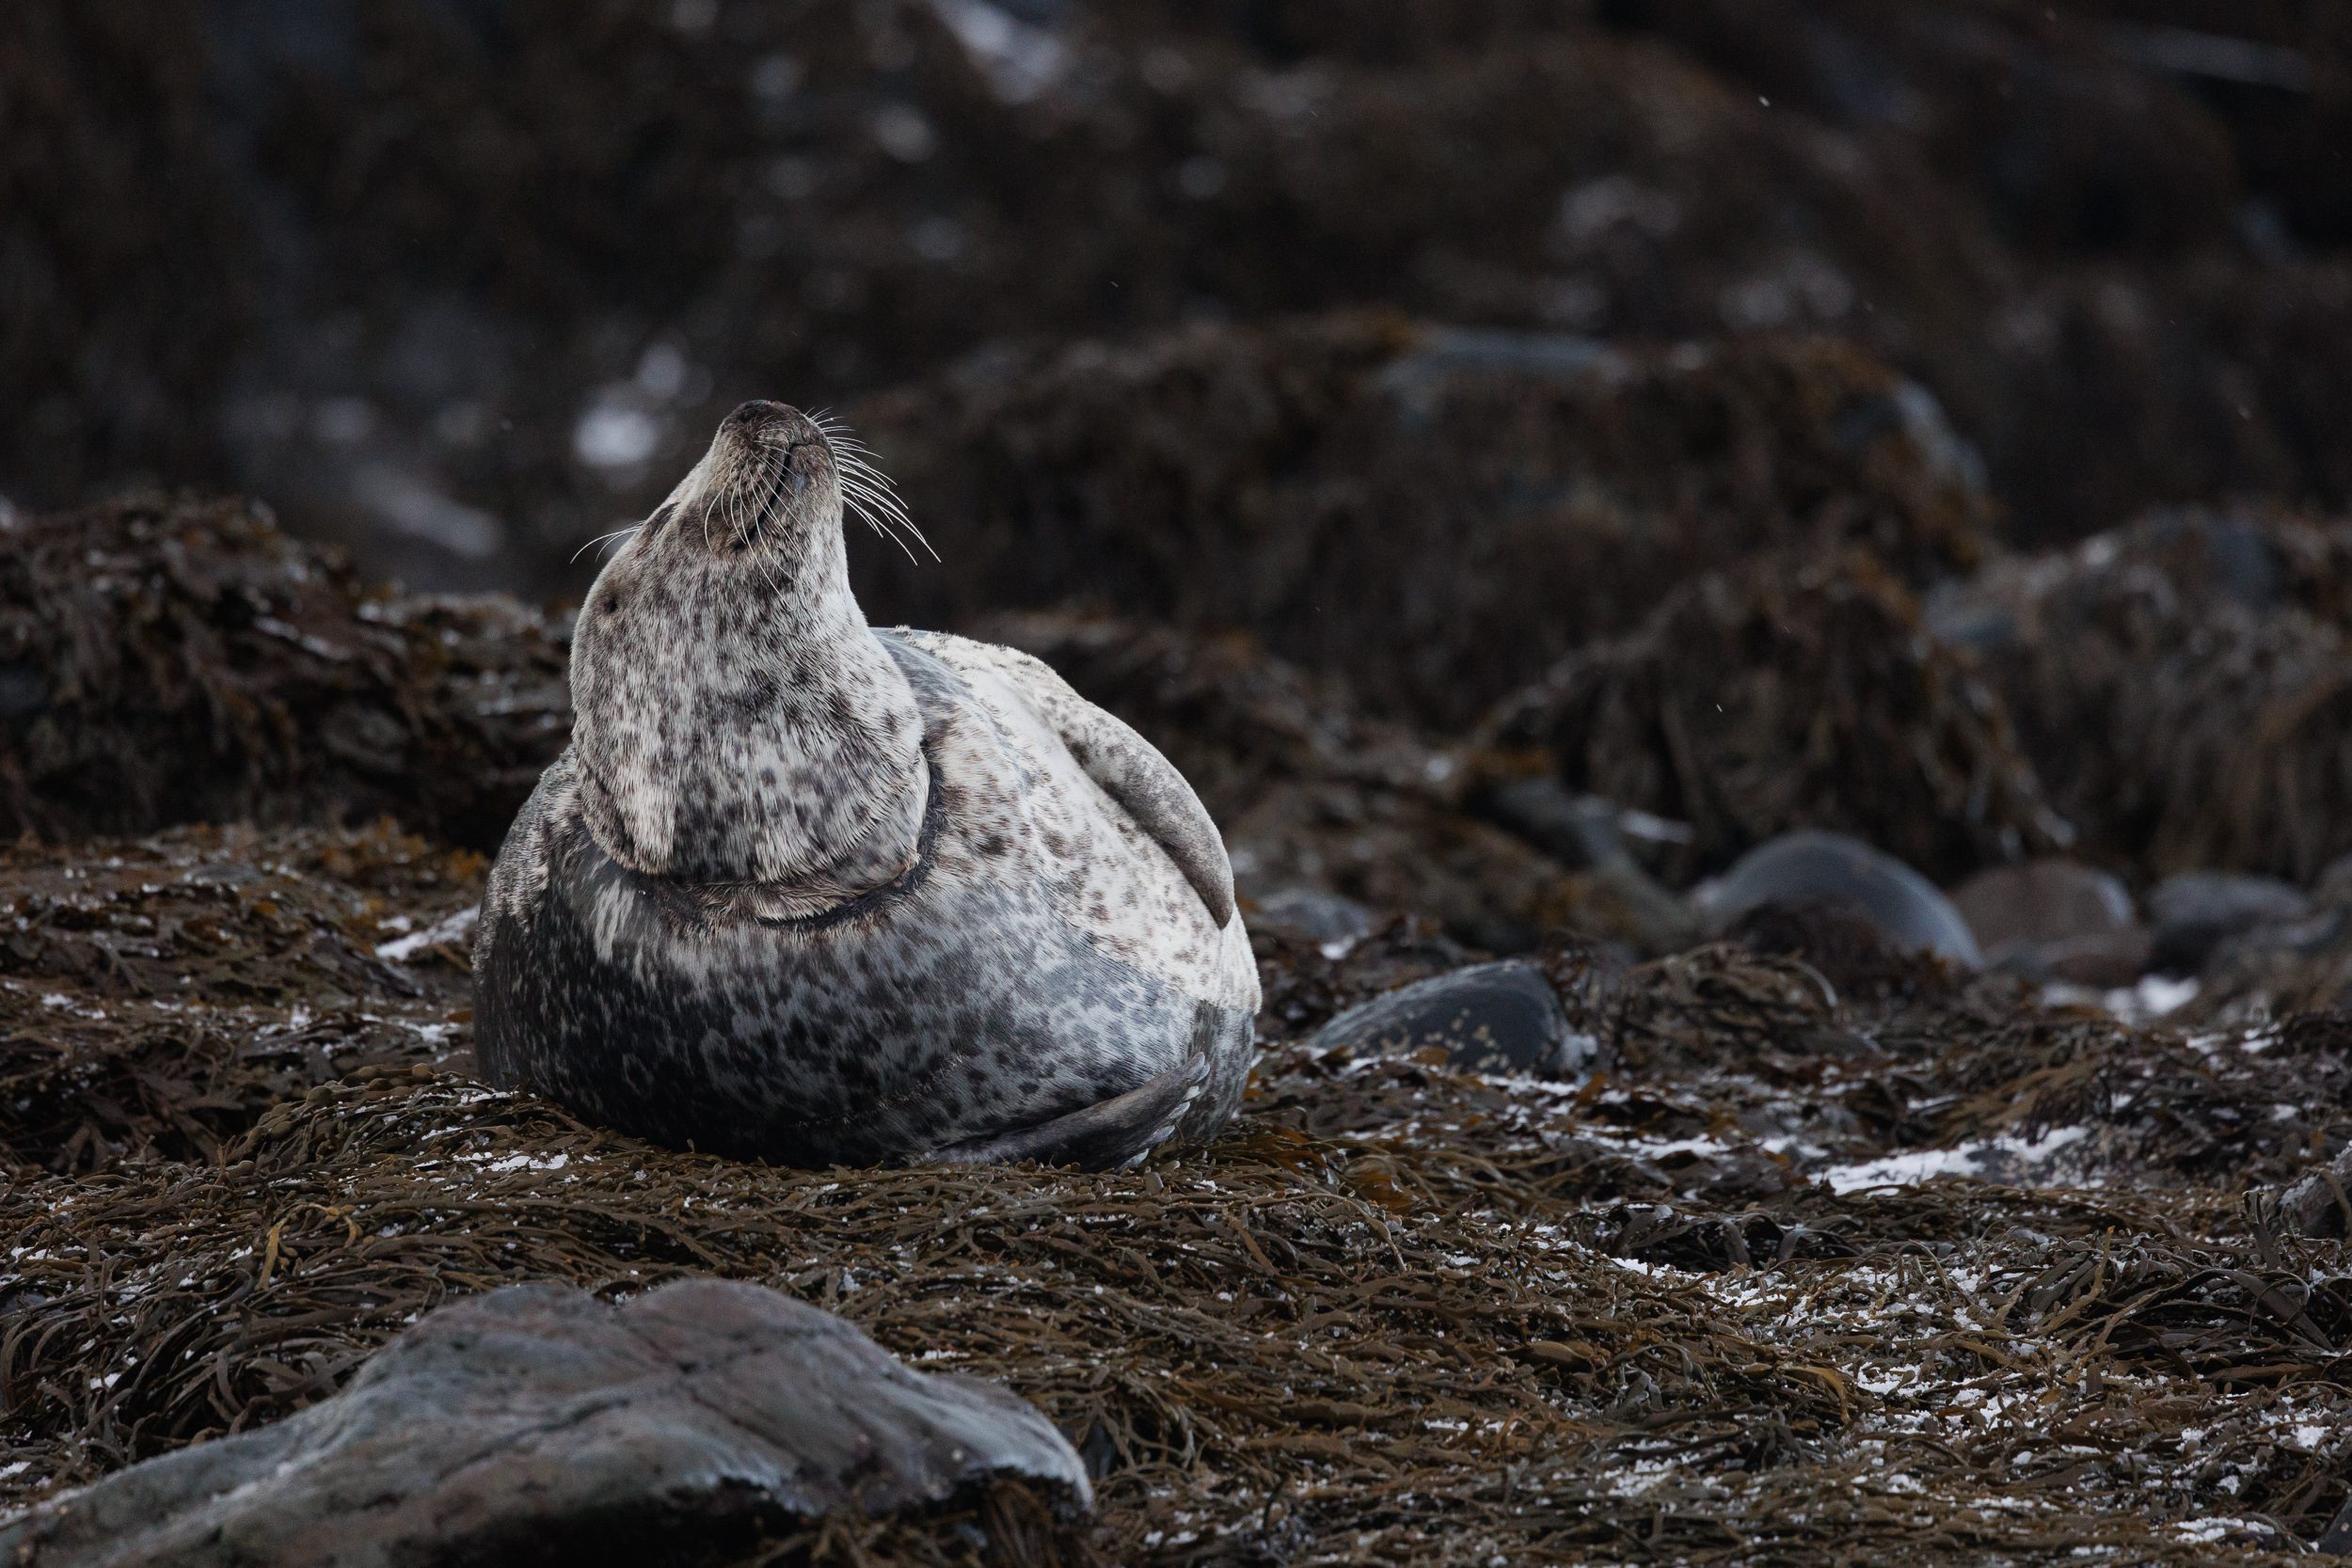 A grey seal lying in sea weed in Iceland.